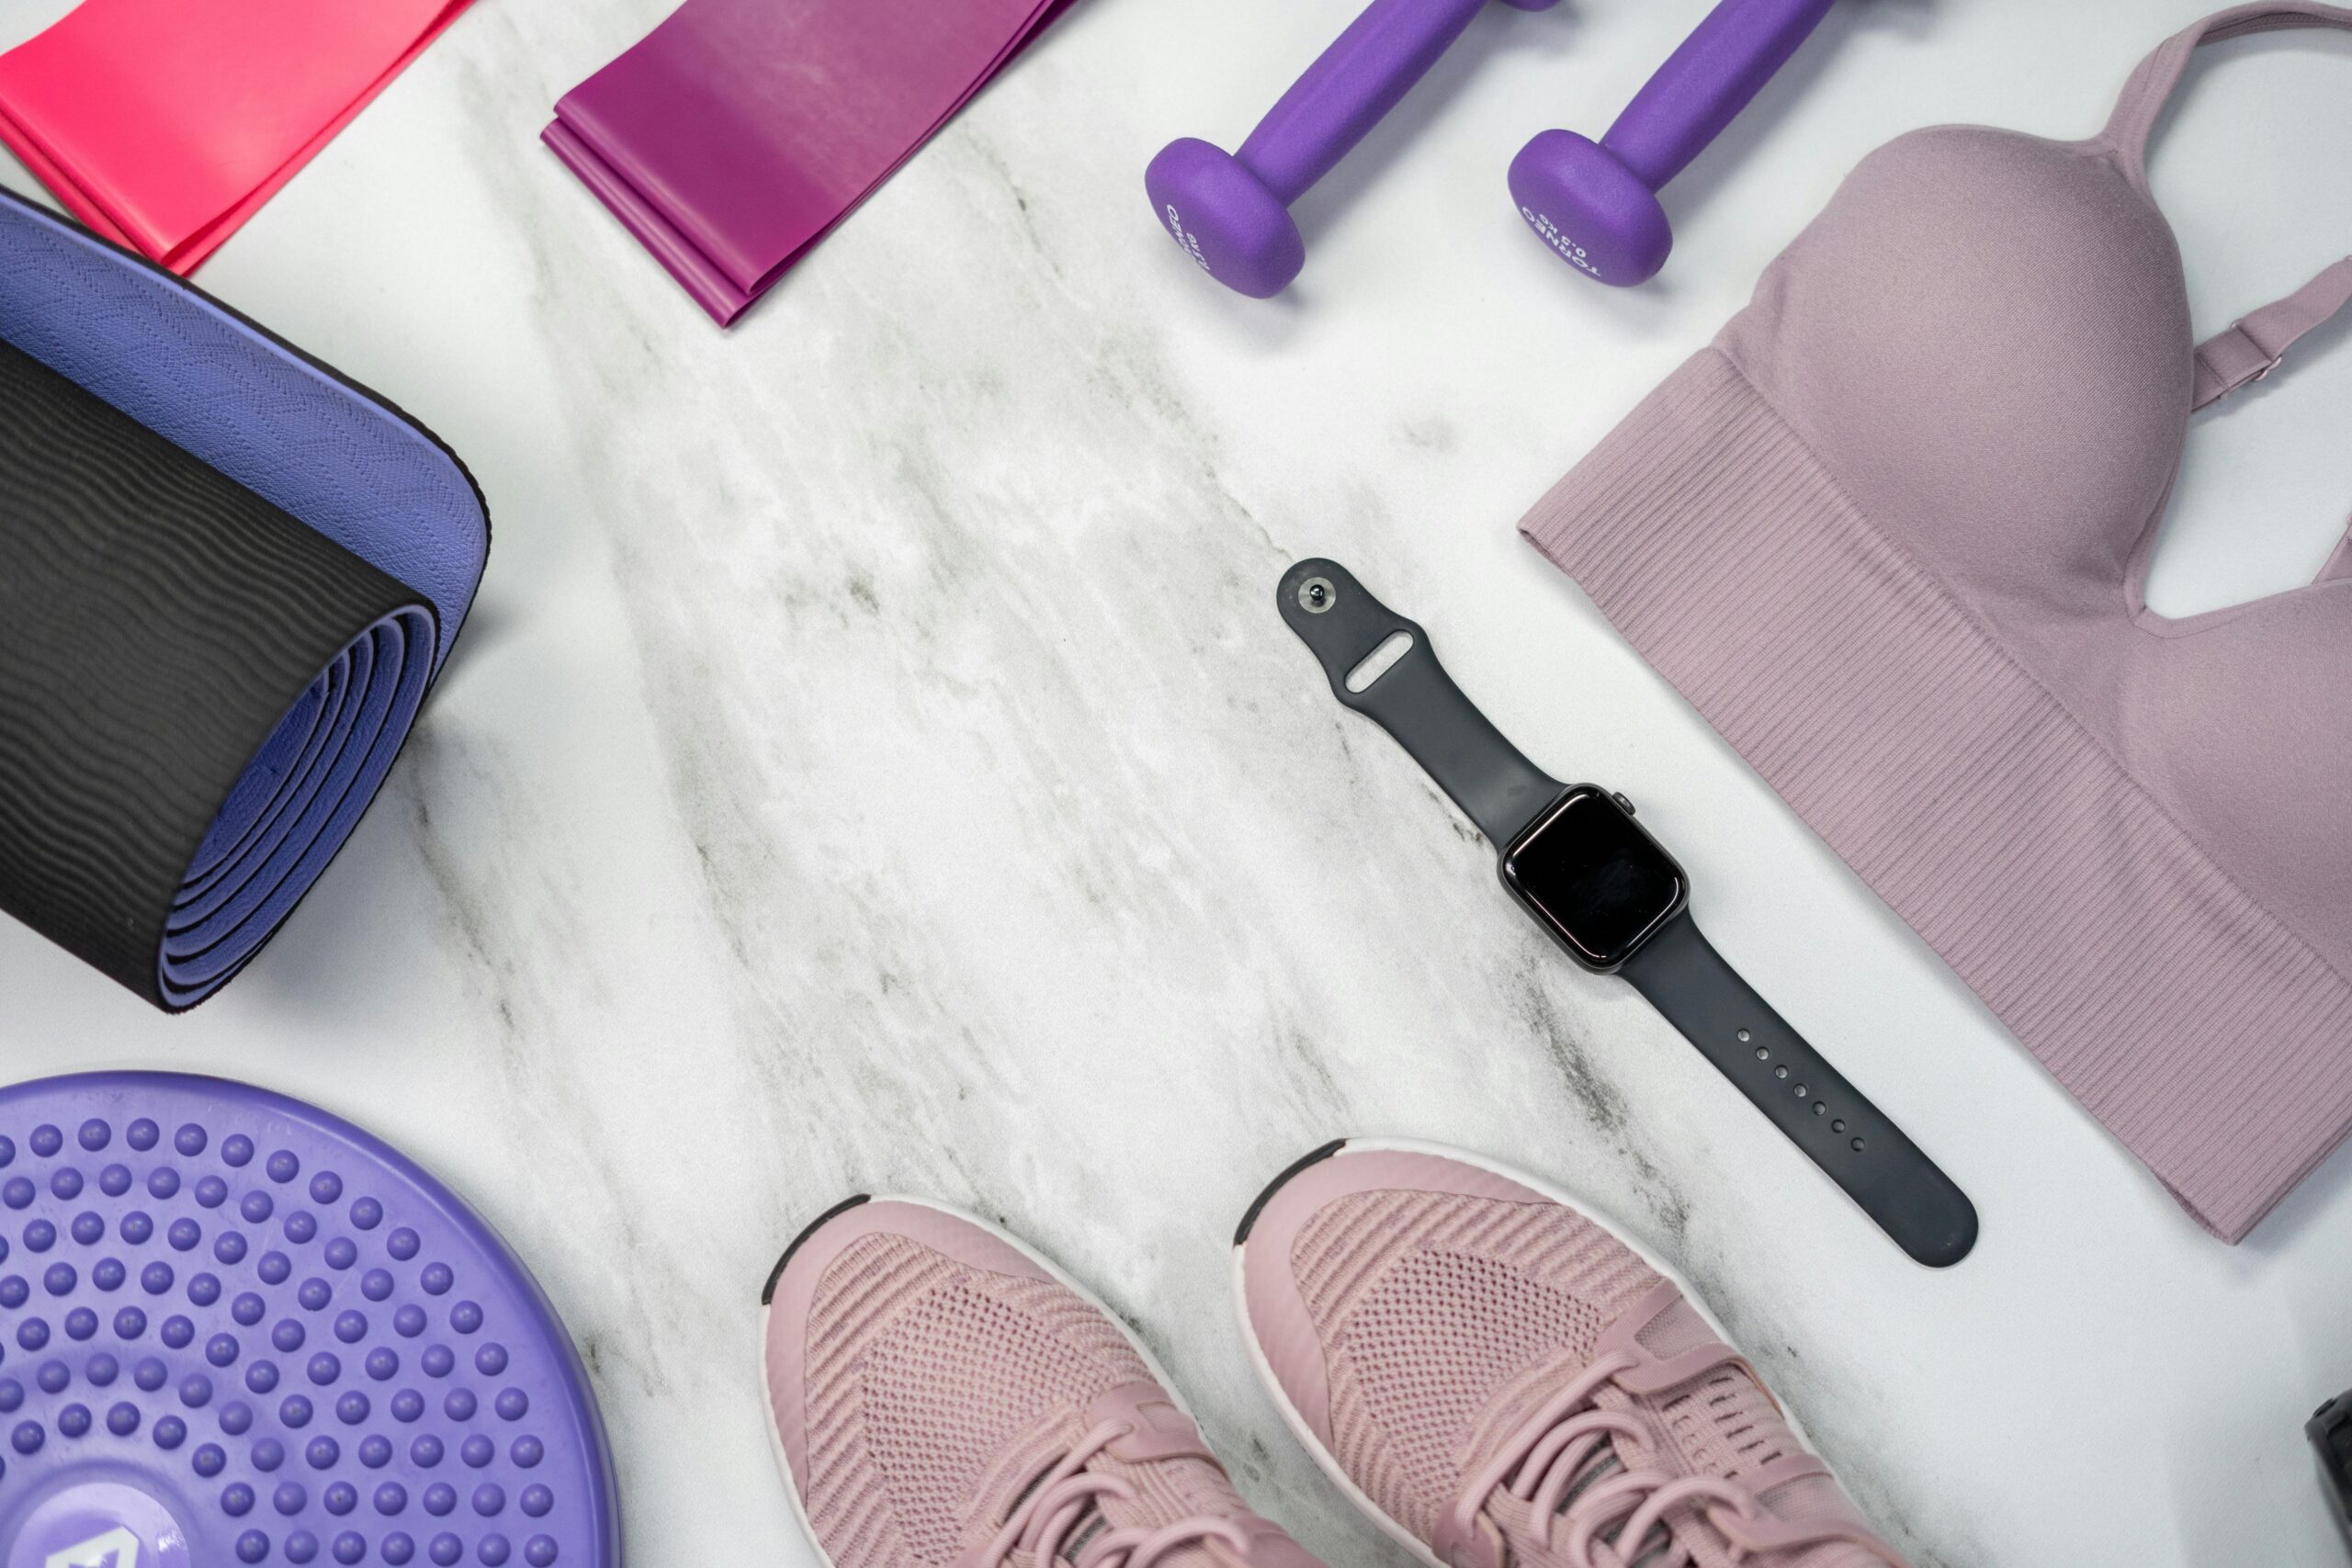 Top view of workout equipment on a marble floor, featuring pink sneakers, a yoga mat, dumbbells, a sports bra, a smartwatch, and other health accessories.